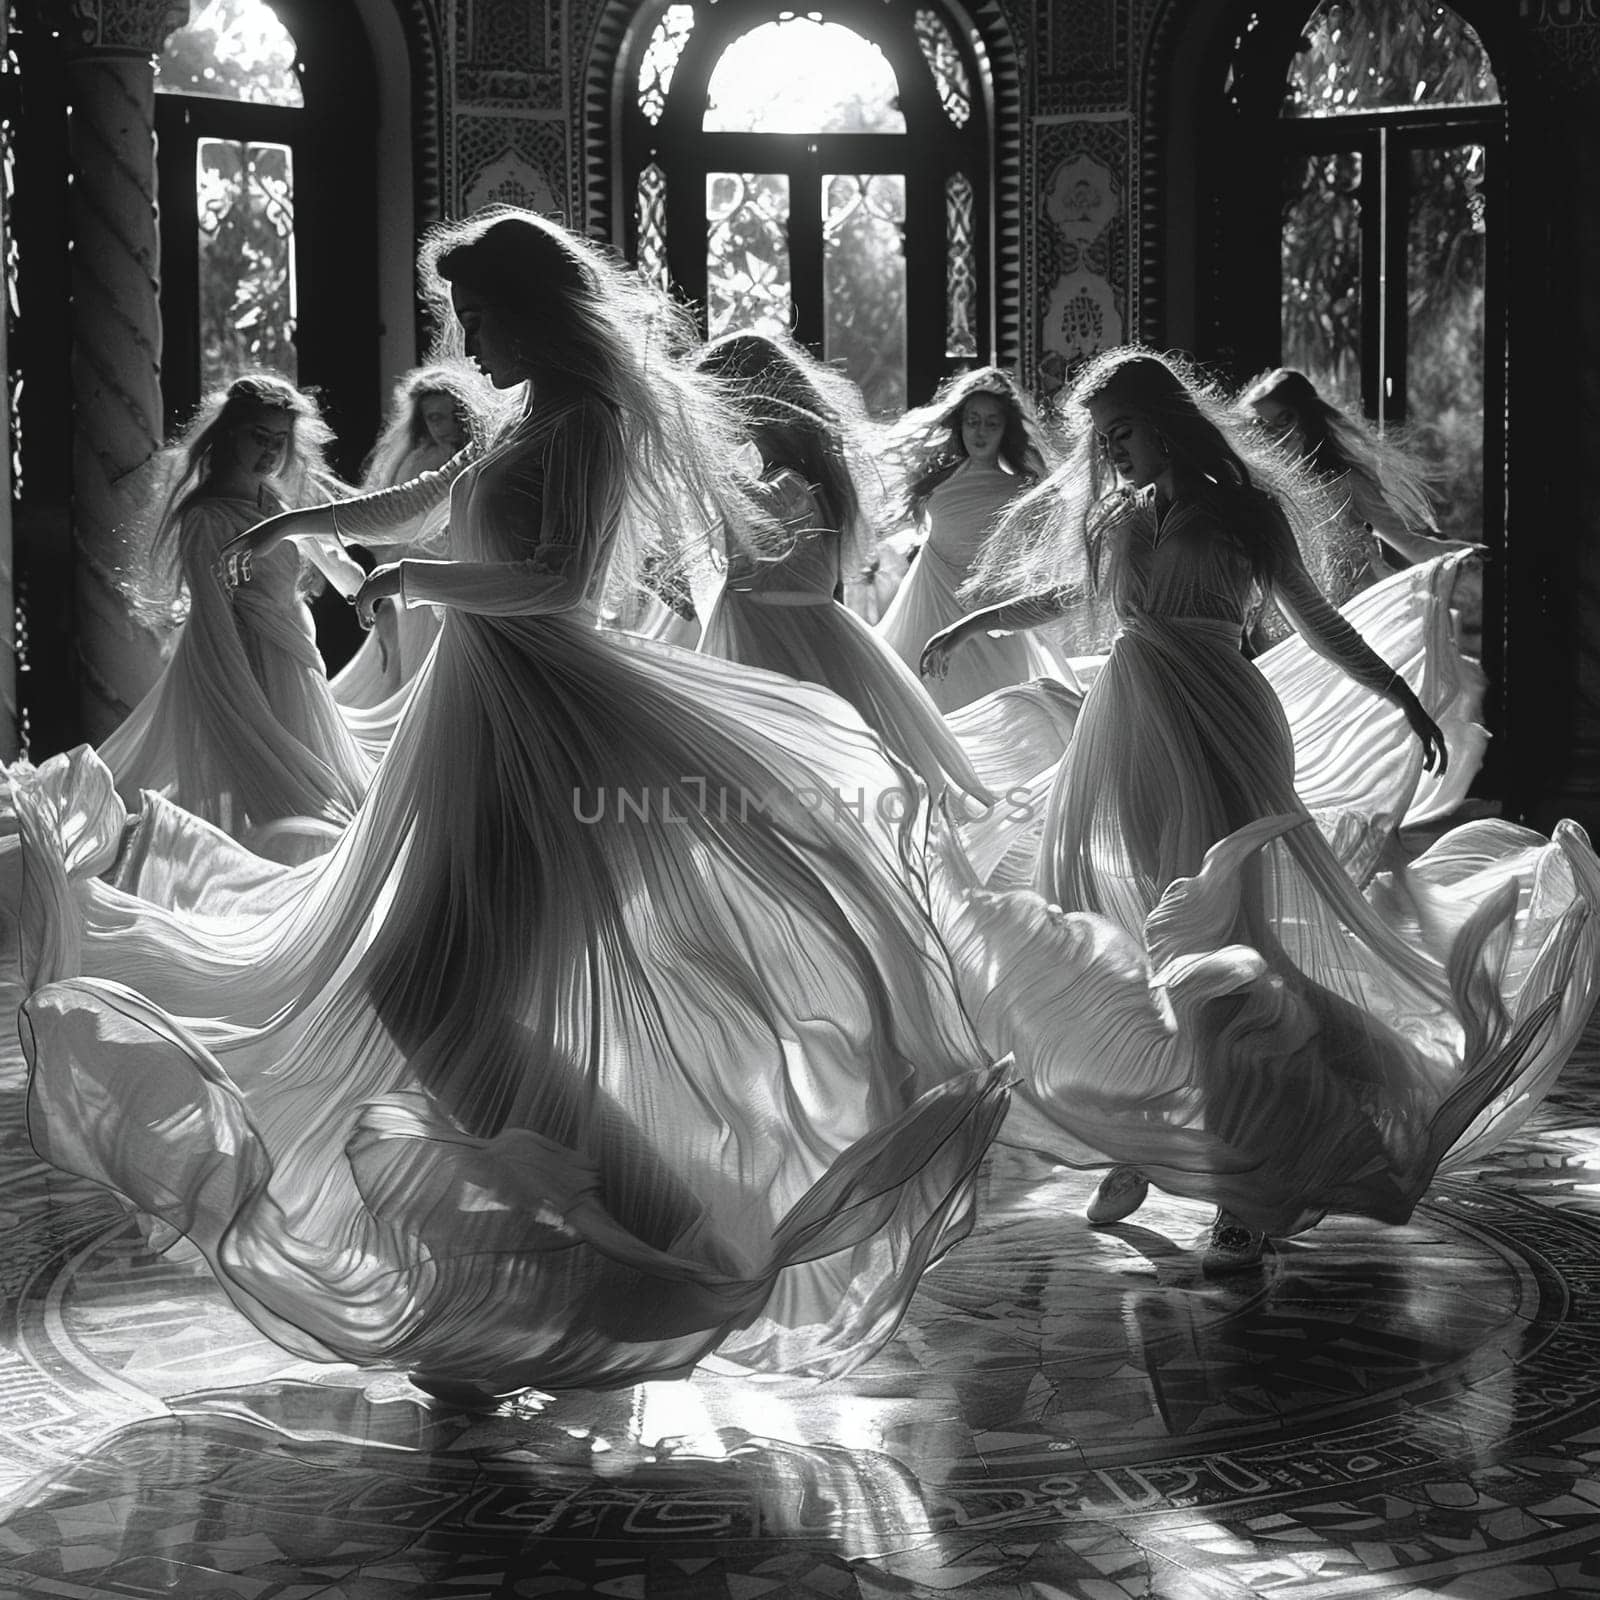 Sufi Whirling Dervish Skirts in Gentle Rotation The skirts motion blurs by Benzoix